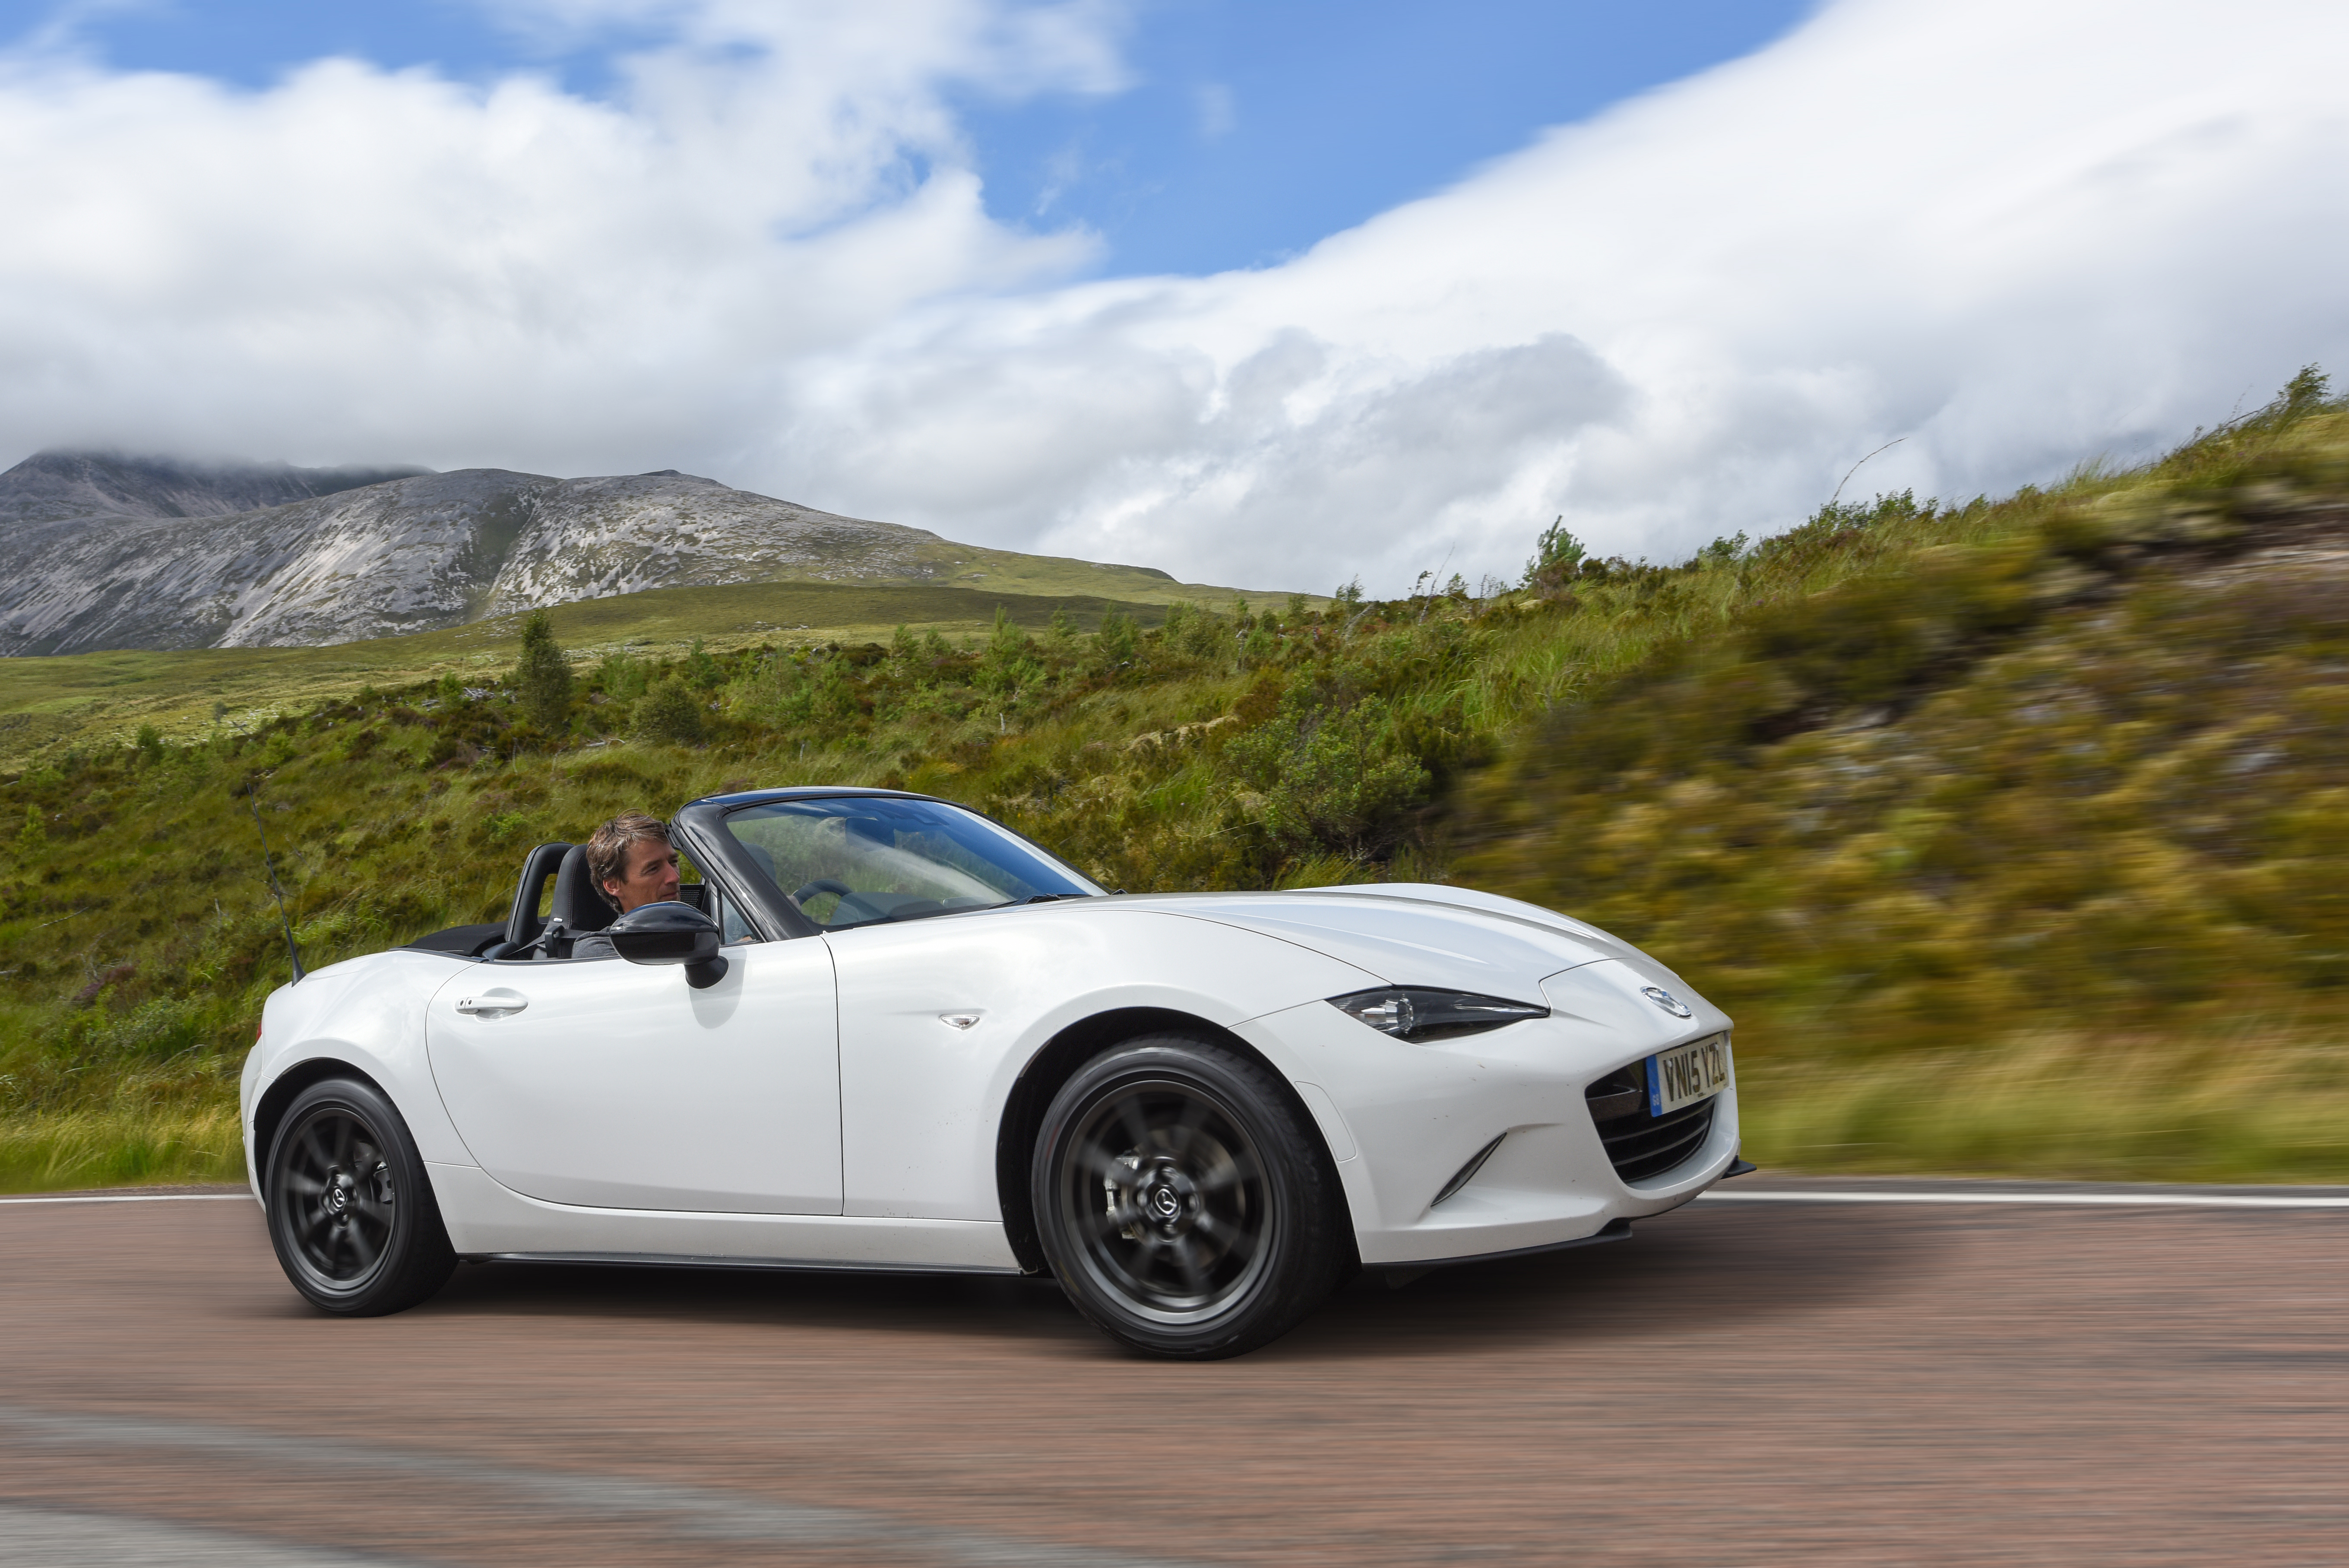 Car experts have shared their picks for the best convertibles you can buy for under £5,000